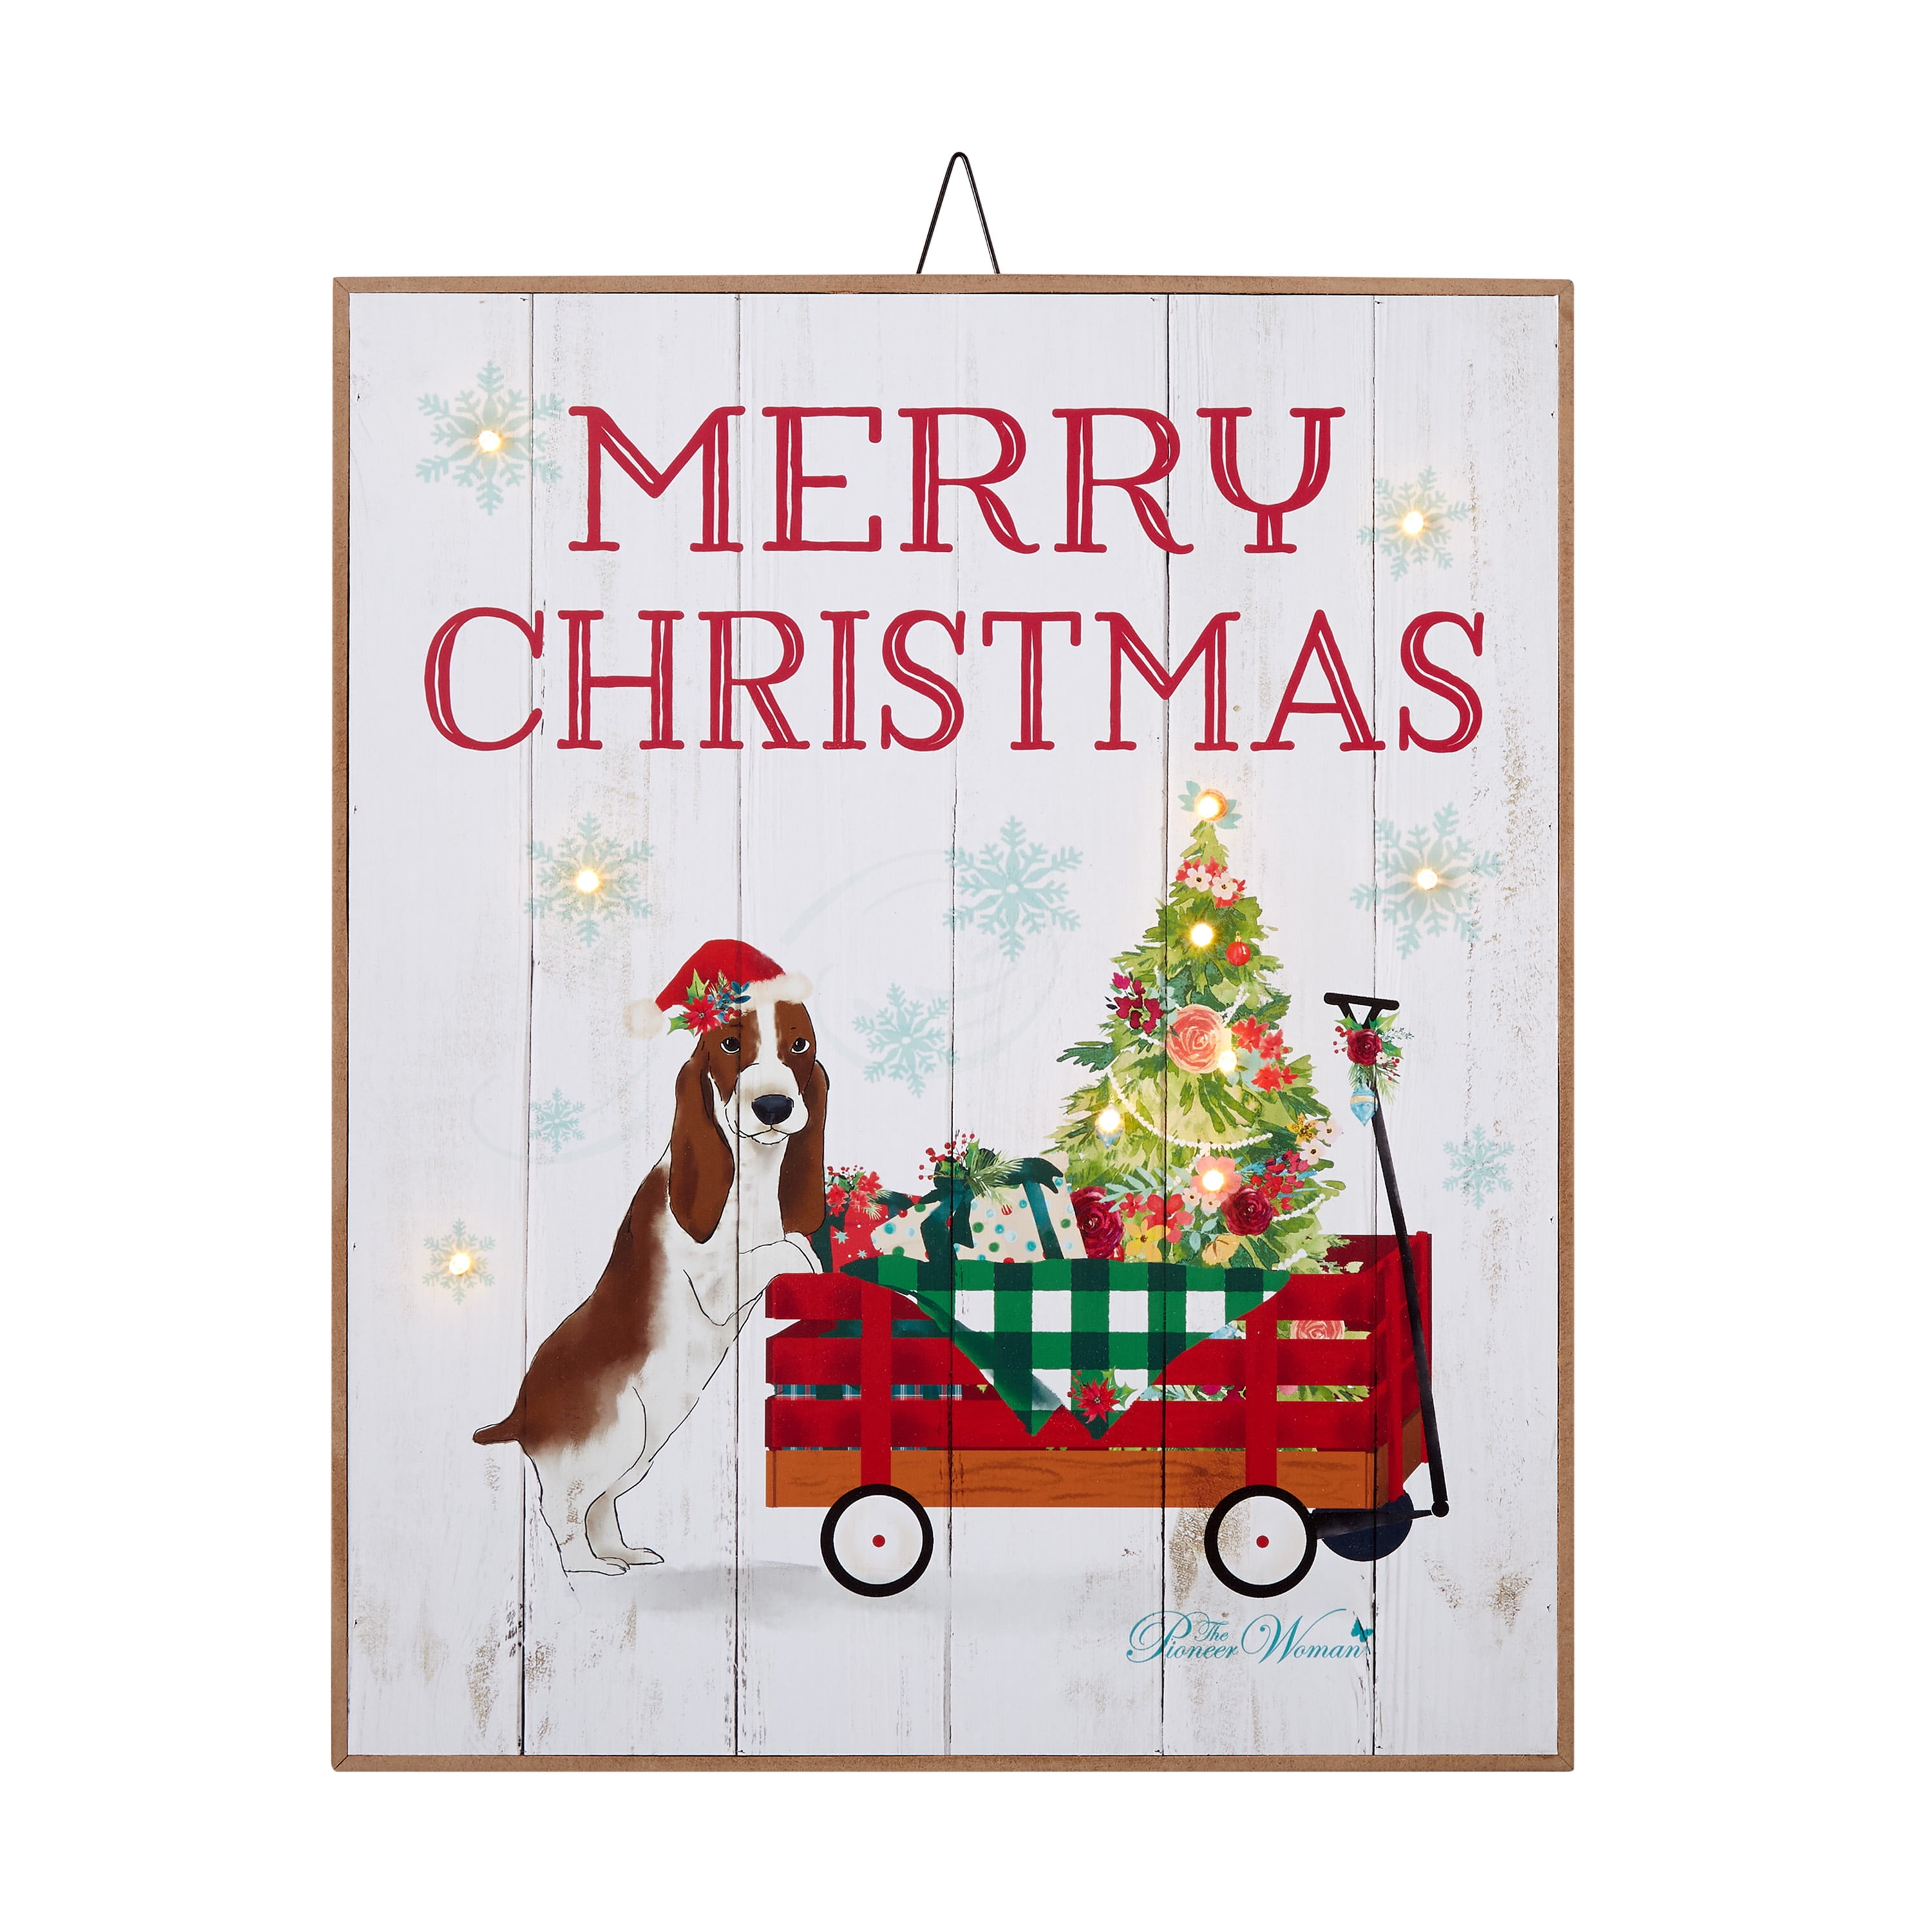 Wall Arts Home Decors Merry Christmas Event Posters Best Merry Christmas Gift